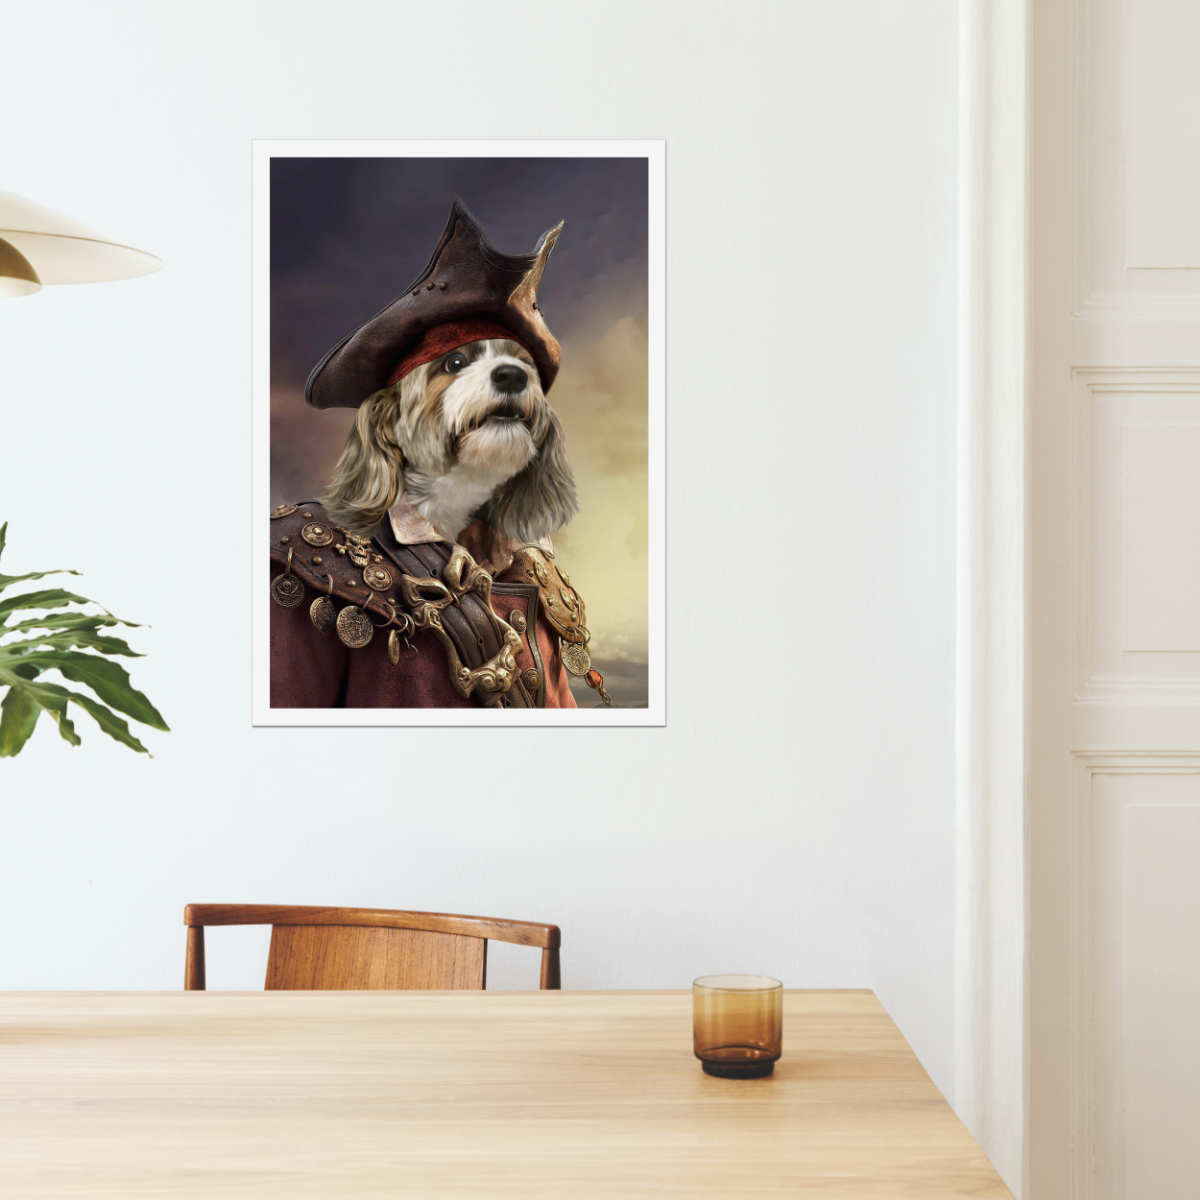 The Pirate: Custom Pet Poster - Paw & Glory - #pet portraits# - #dog portraits# - #pet portraits uk#Paw & Glory, paw and glory, pet portrait singapore, pet portrait admiral, dog portrait images, pictures for pets, pet portraits leeds, the general portrait, pet portrait